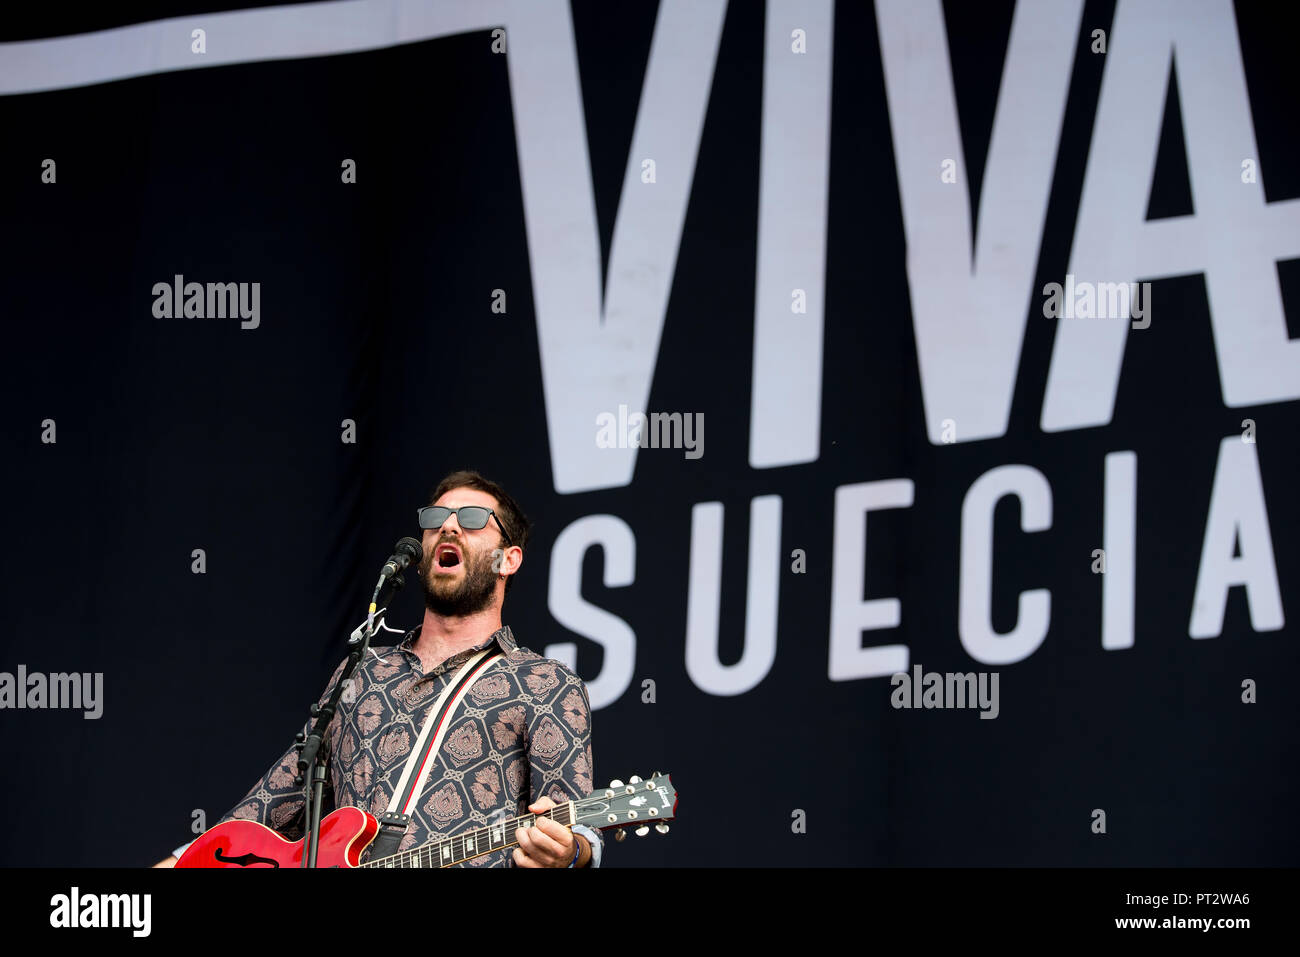 MADRID - SEP 8: Viva Suecia (band) perform in concert at Dcode Music  Festival on September 8, 2018 in Madrid, Spain Stock Photo - Alamy